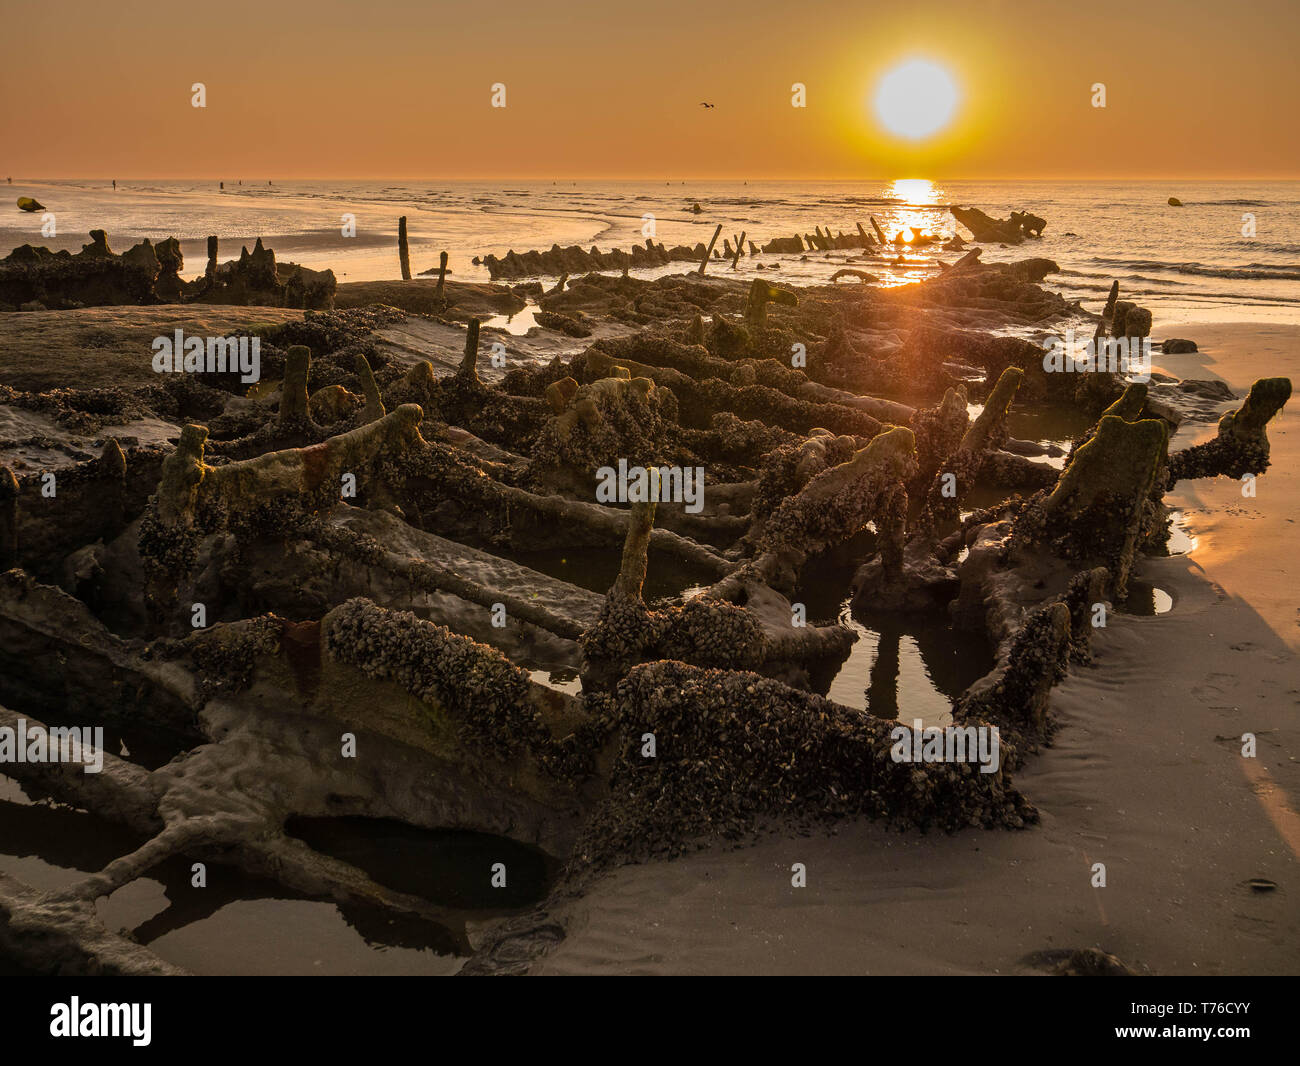 Wreckage of a world war ship at sunset close to the beach Stock Photo